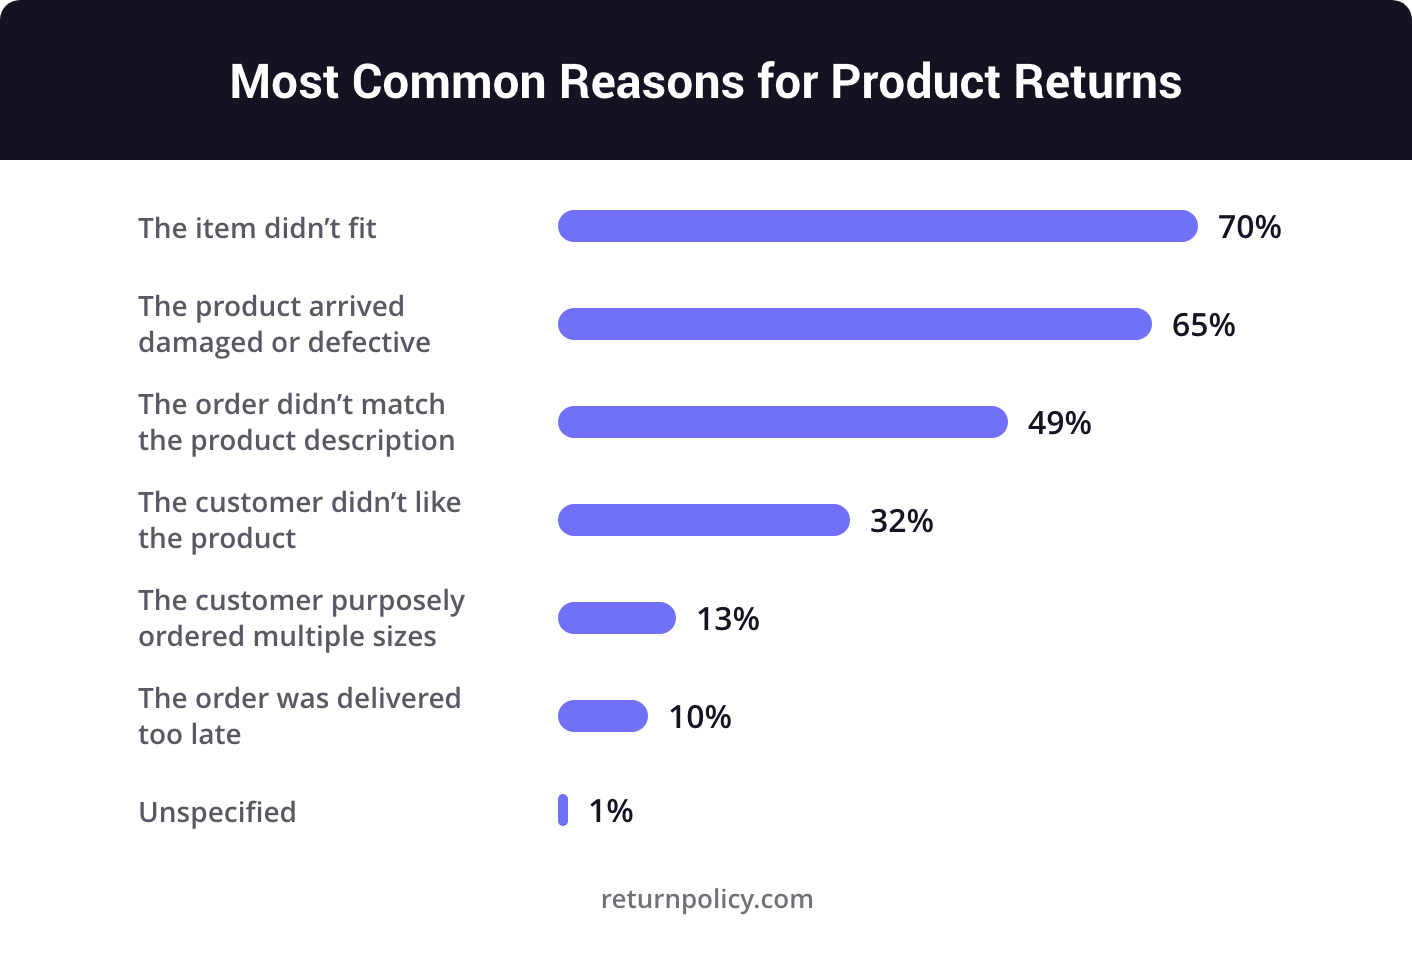 Most Common Reasons for Product Returns chart